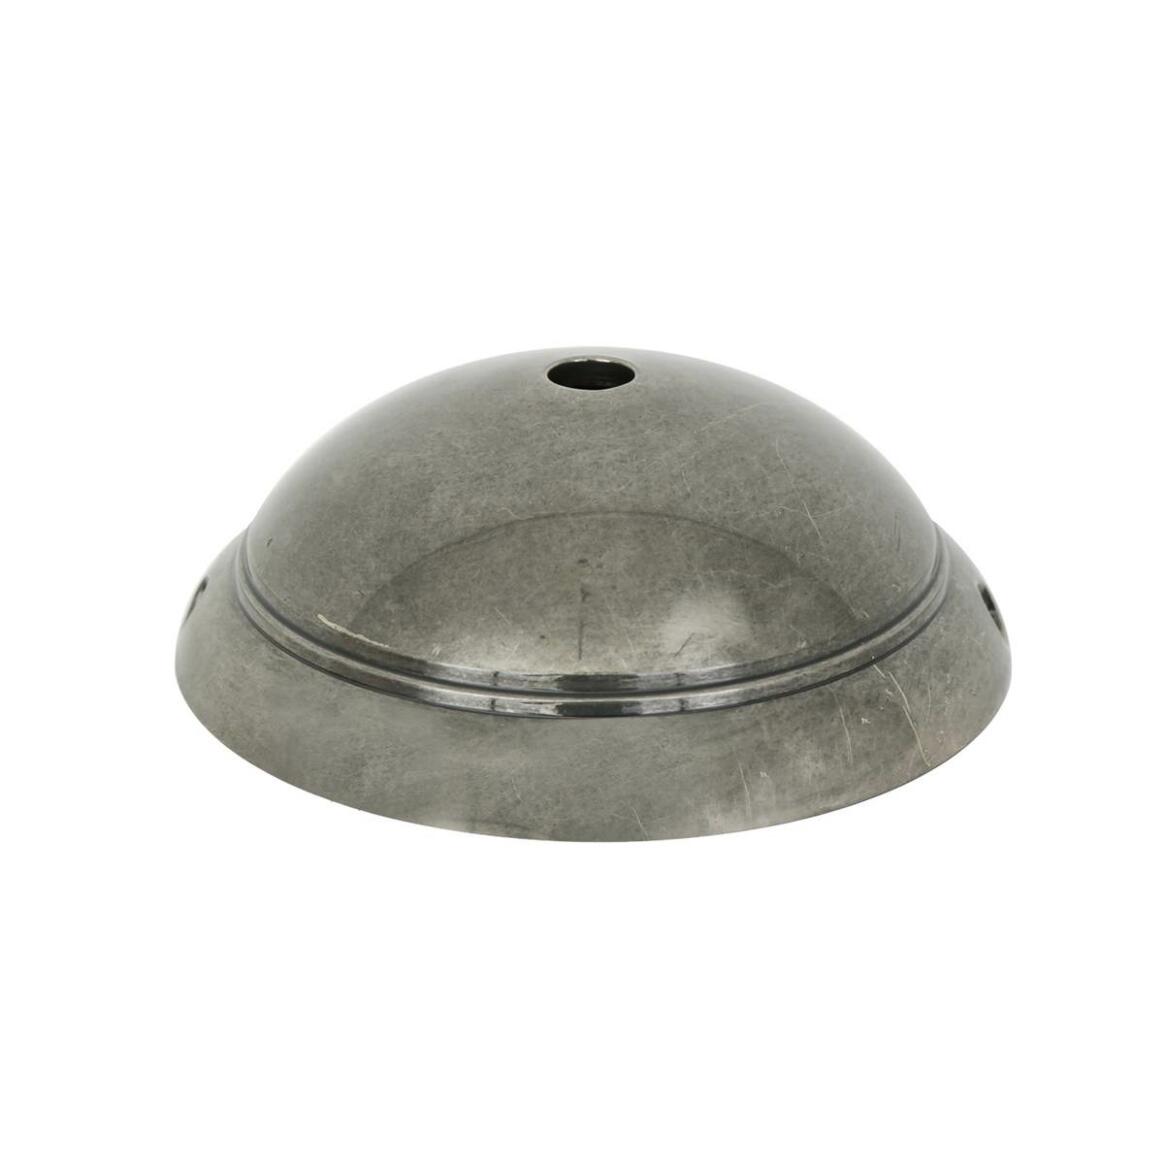 100mm cast dome wall bracket main product image